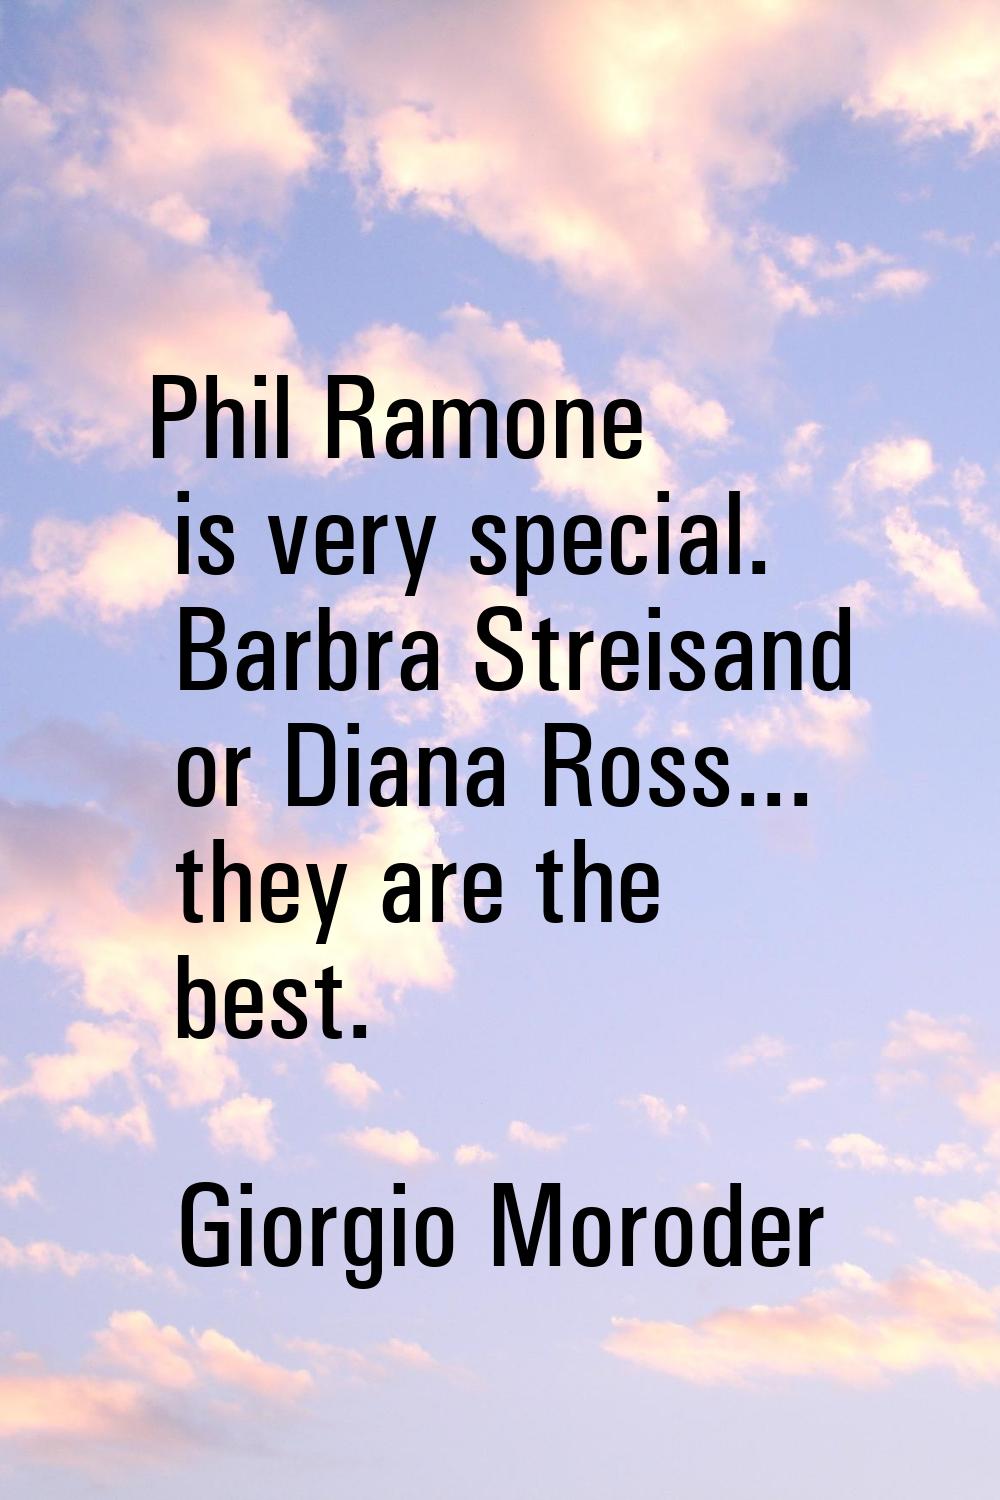 Phil Ramone is very special. Barbra Streisand or Diana Ross... they are the best.